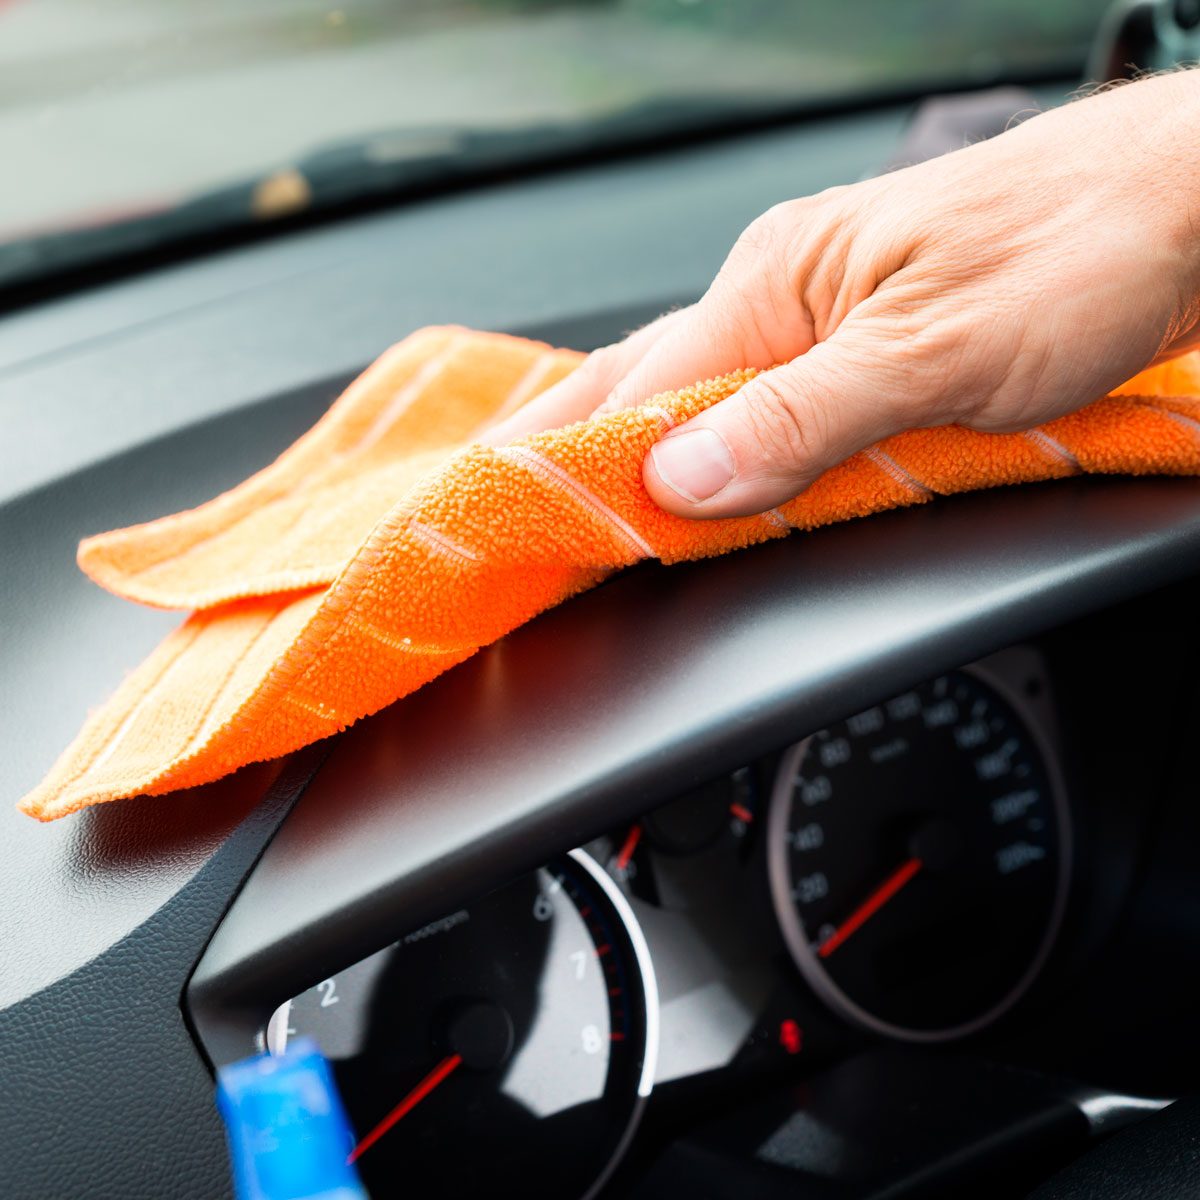 Are You Using This Top Secret Dashboard Cleaner?